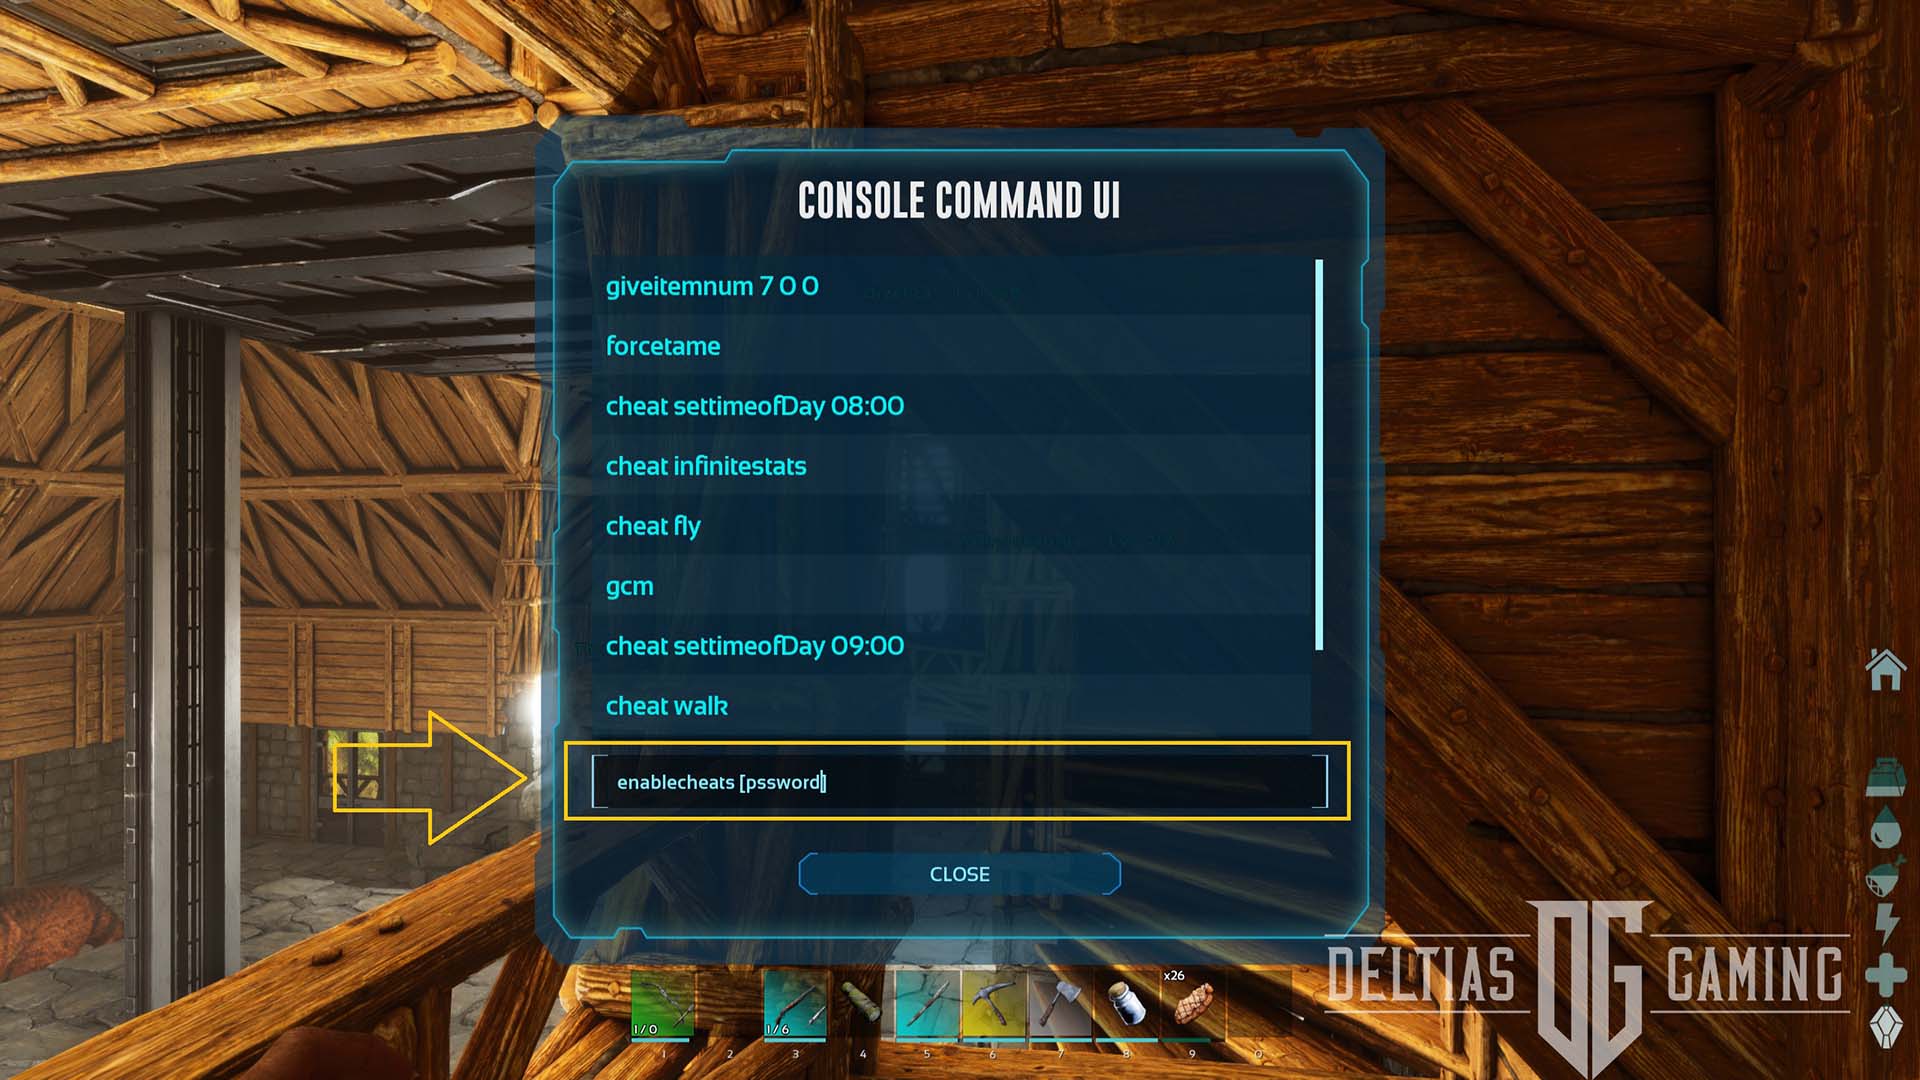 How to Enable Admin and Cheats in ARK Survival Ascended